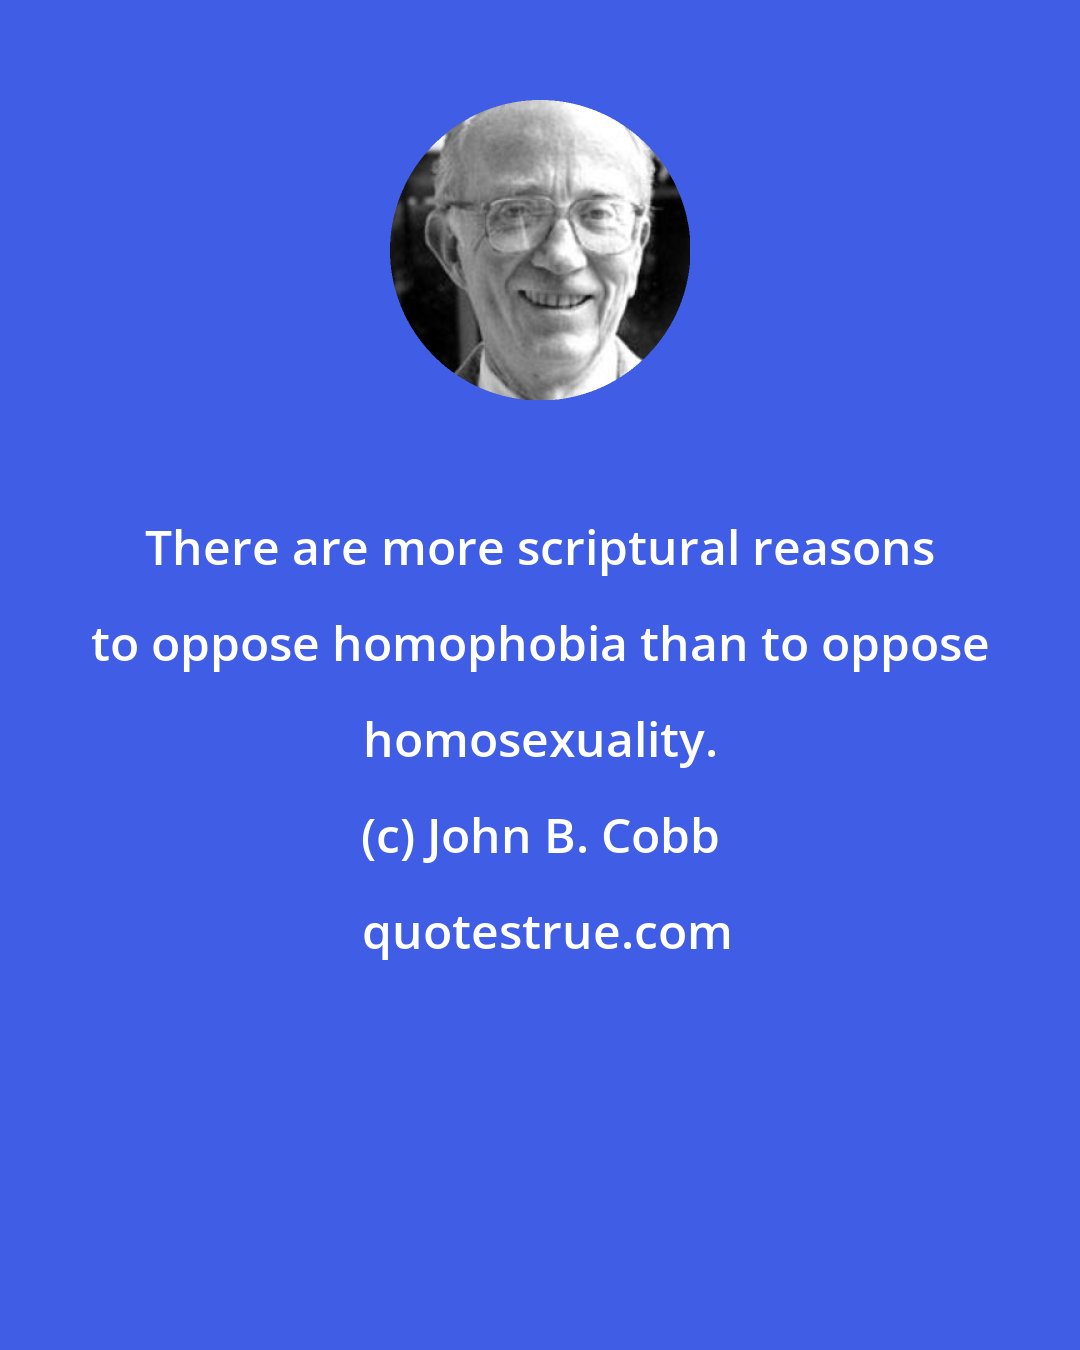 John B. Cobb: There are more scriptural reasons to oppose homophobia than to oppose homosexuality.